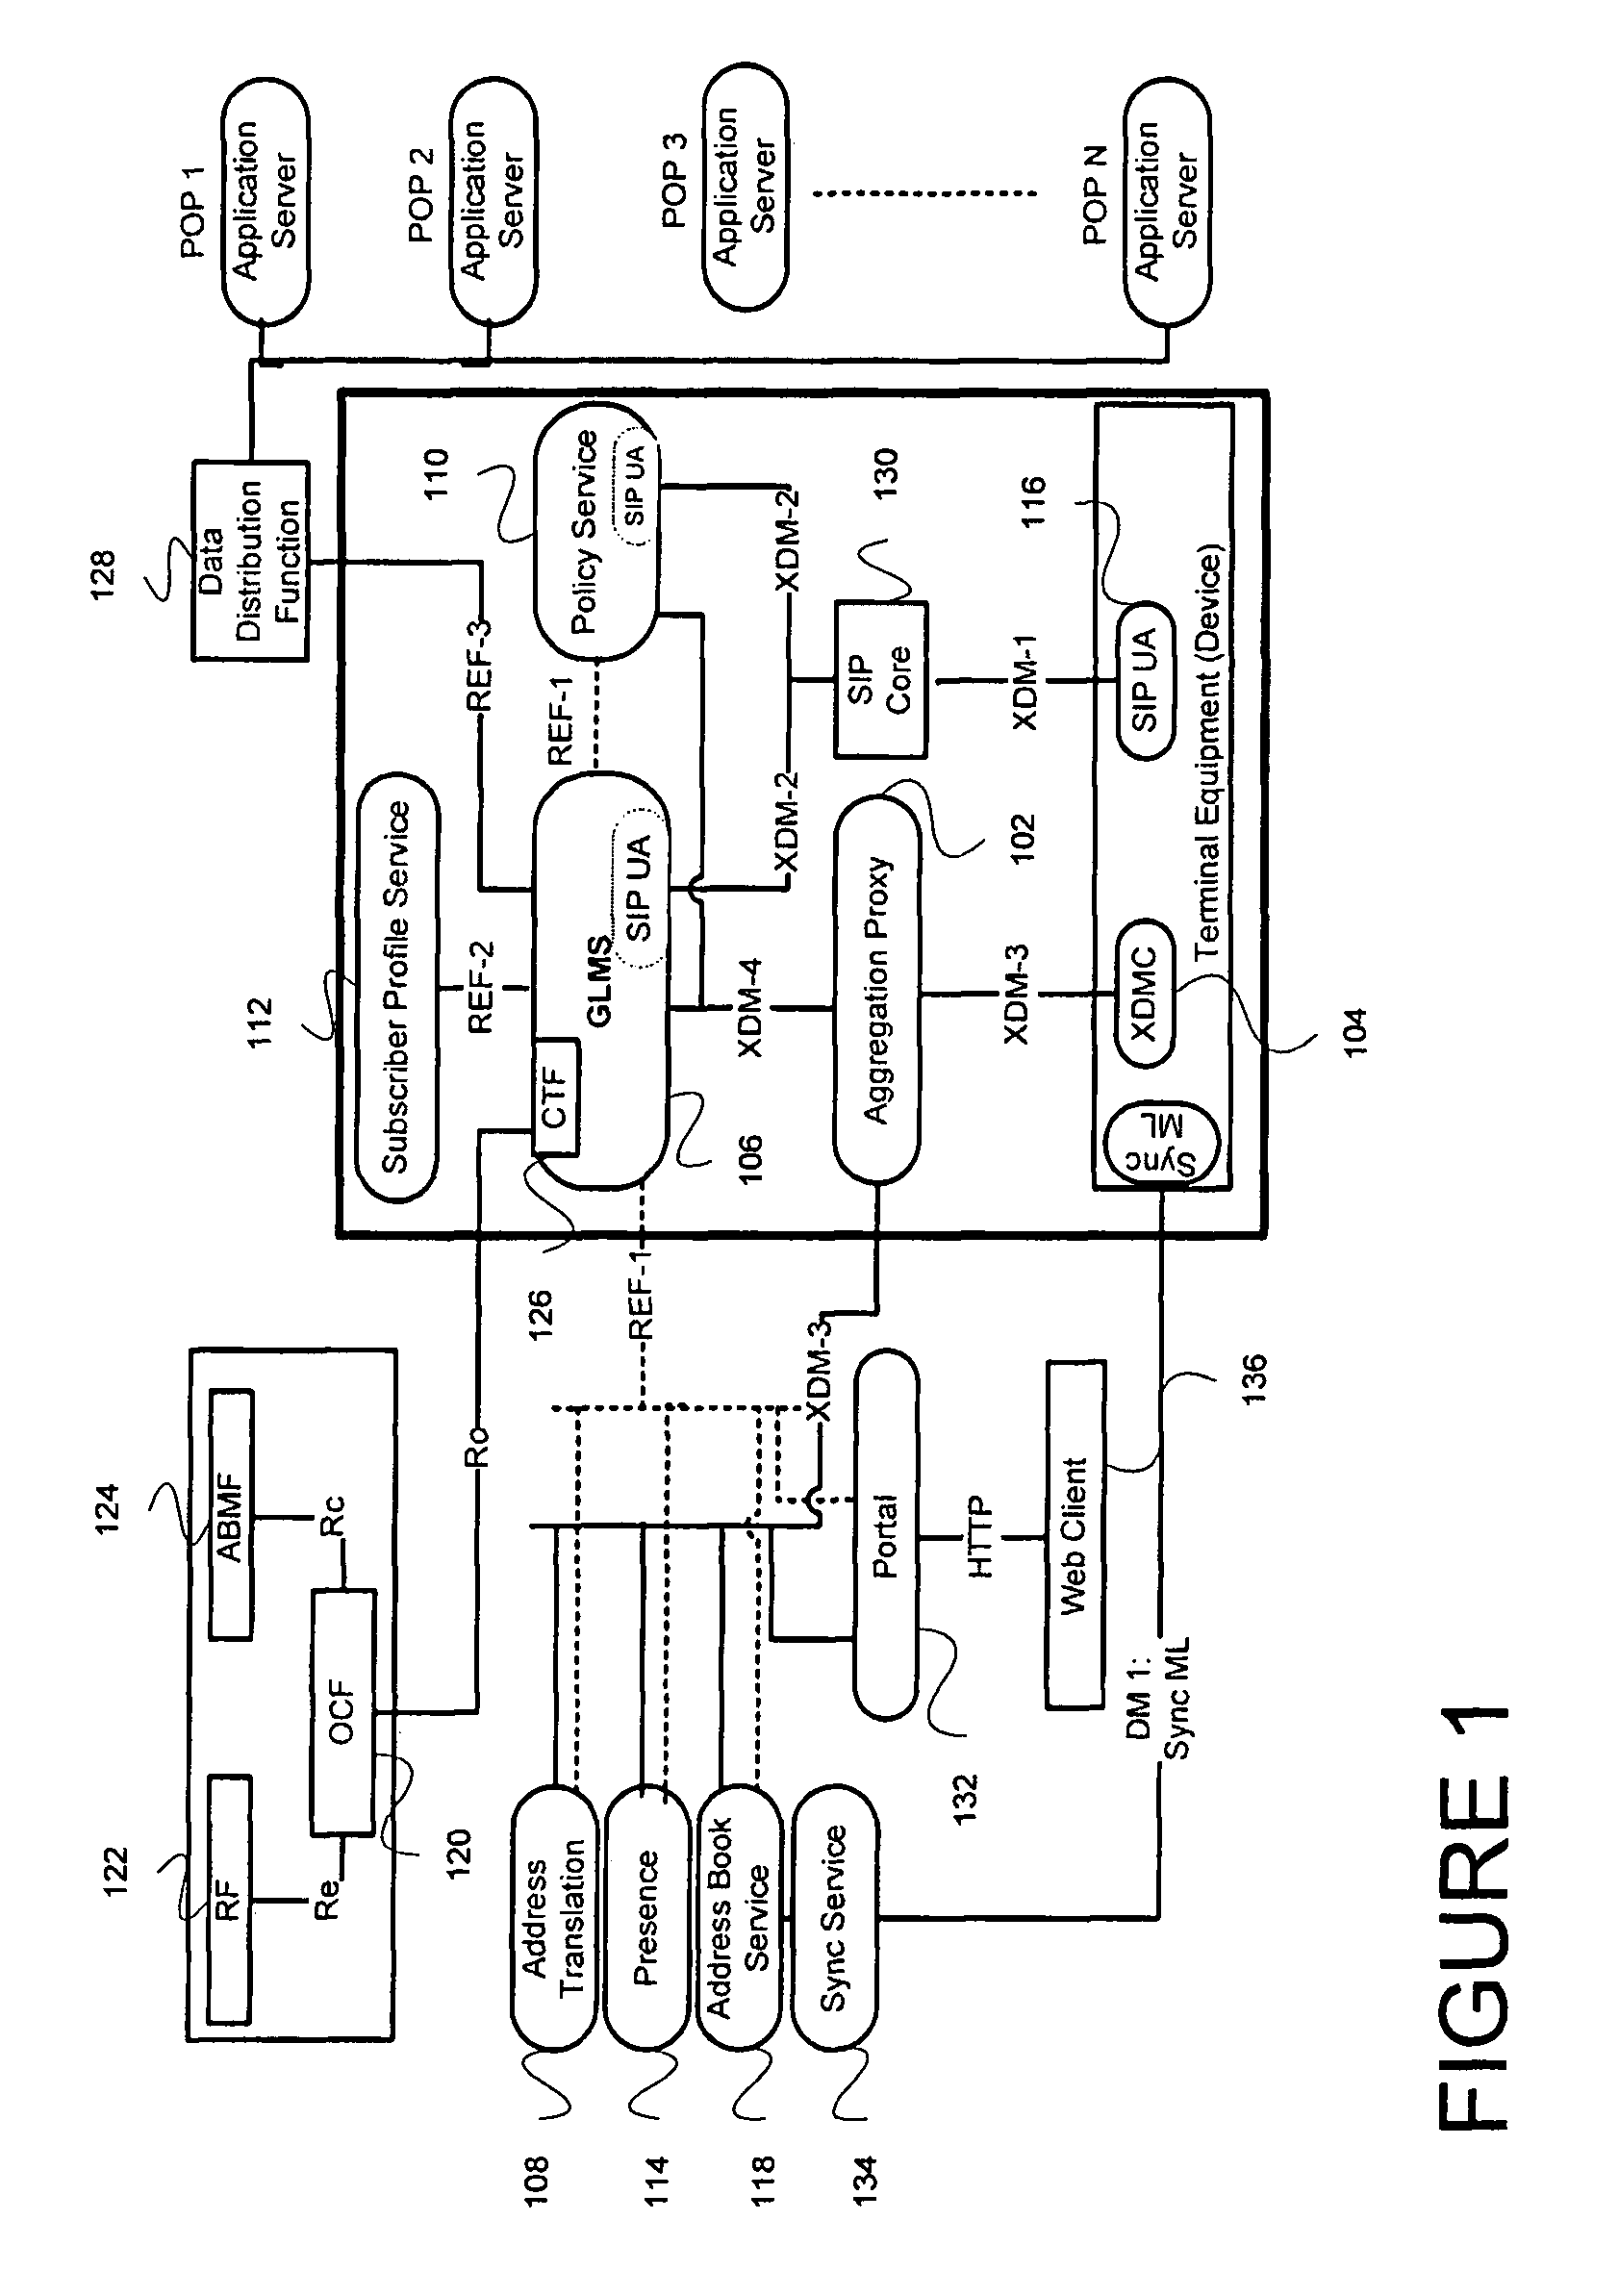 Systems and methods of group distribution for latency sensitive applications